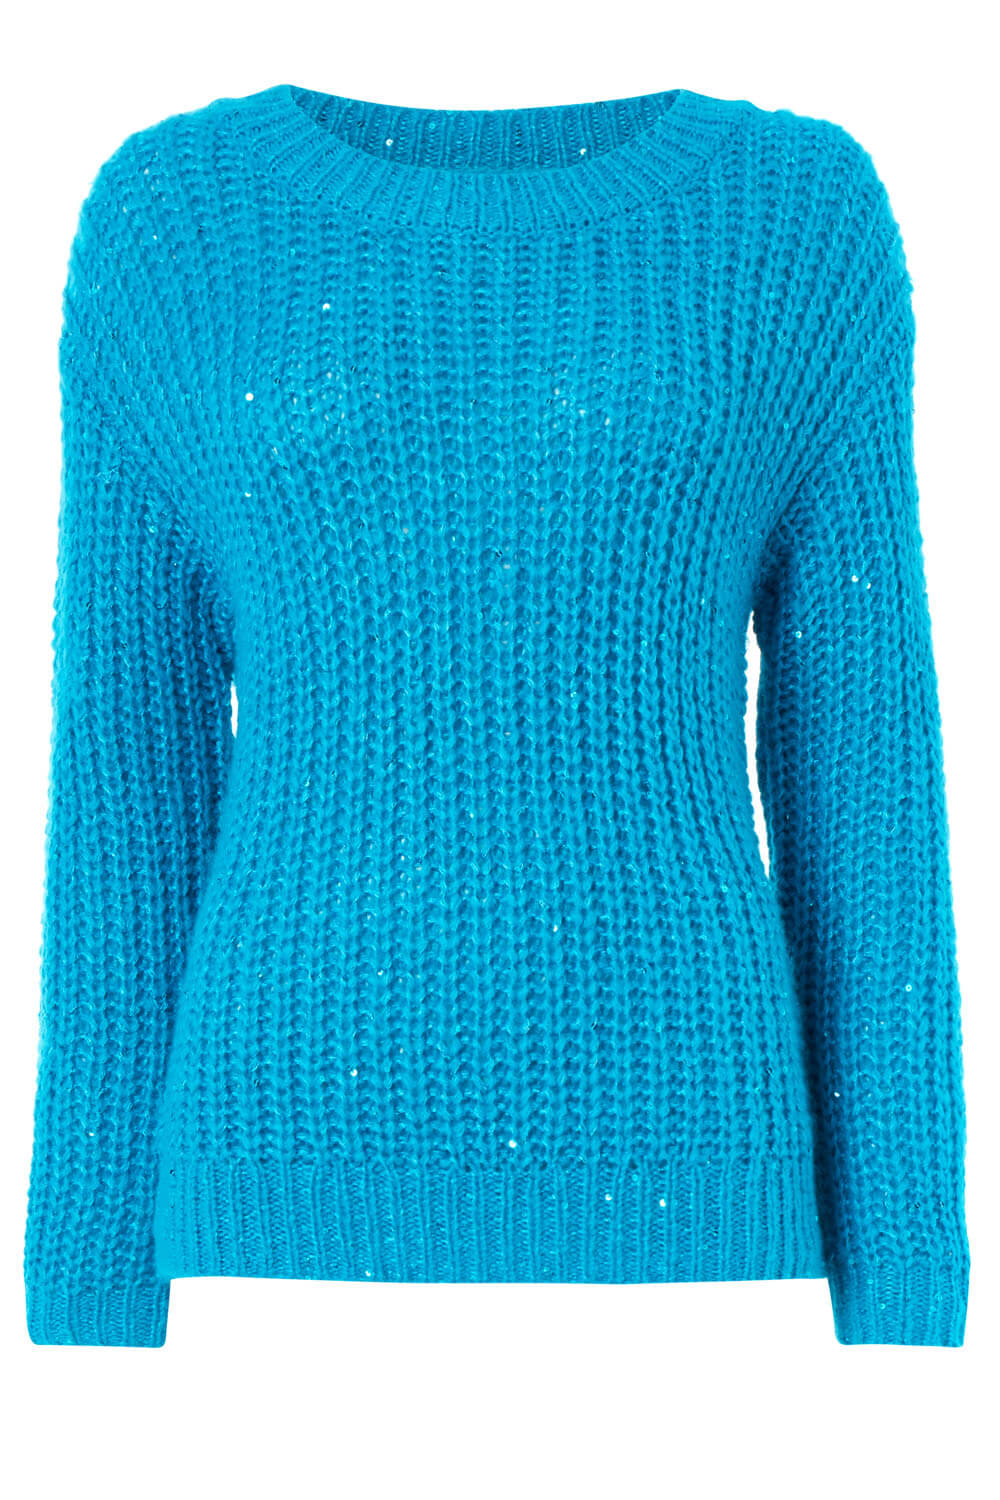 Turquoise Chunky Knit Sequin Jumper , Image 5 of 5